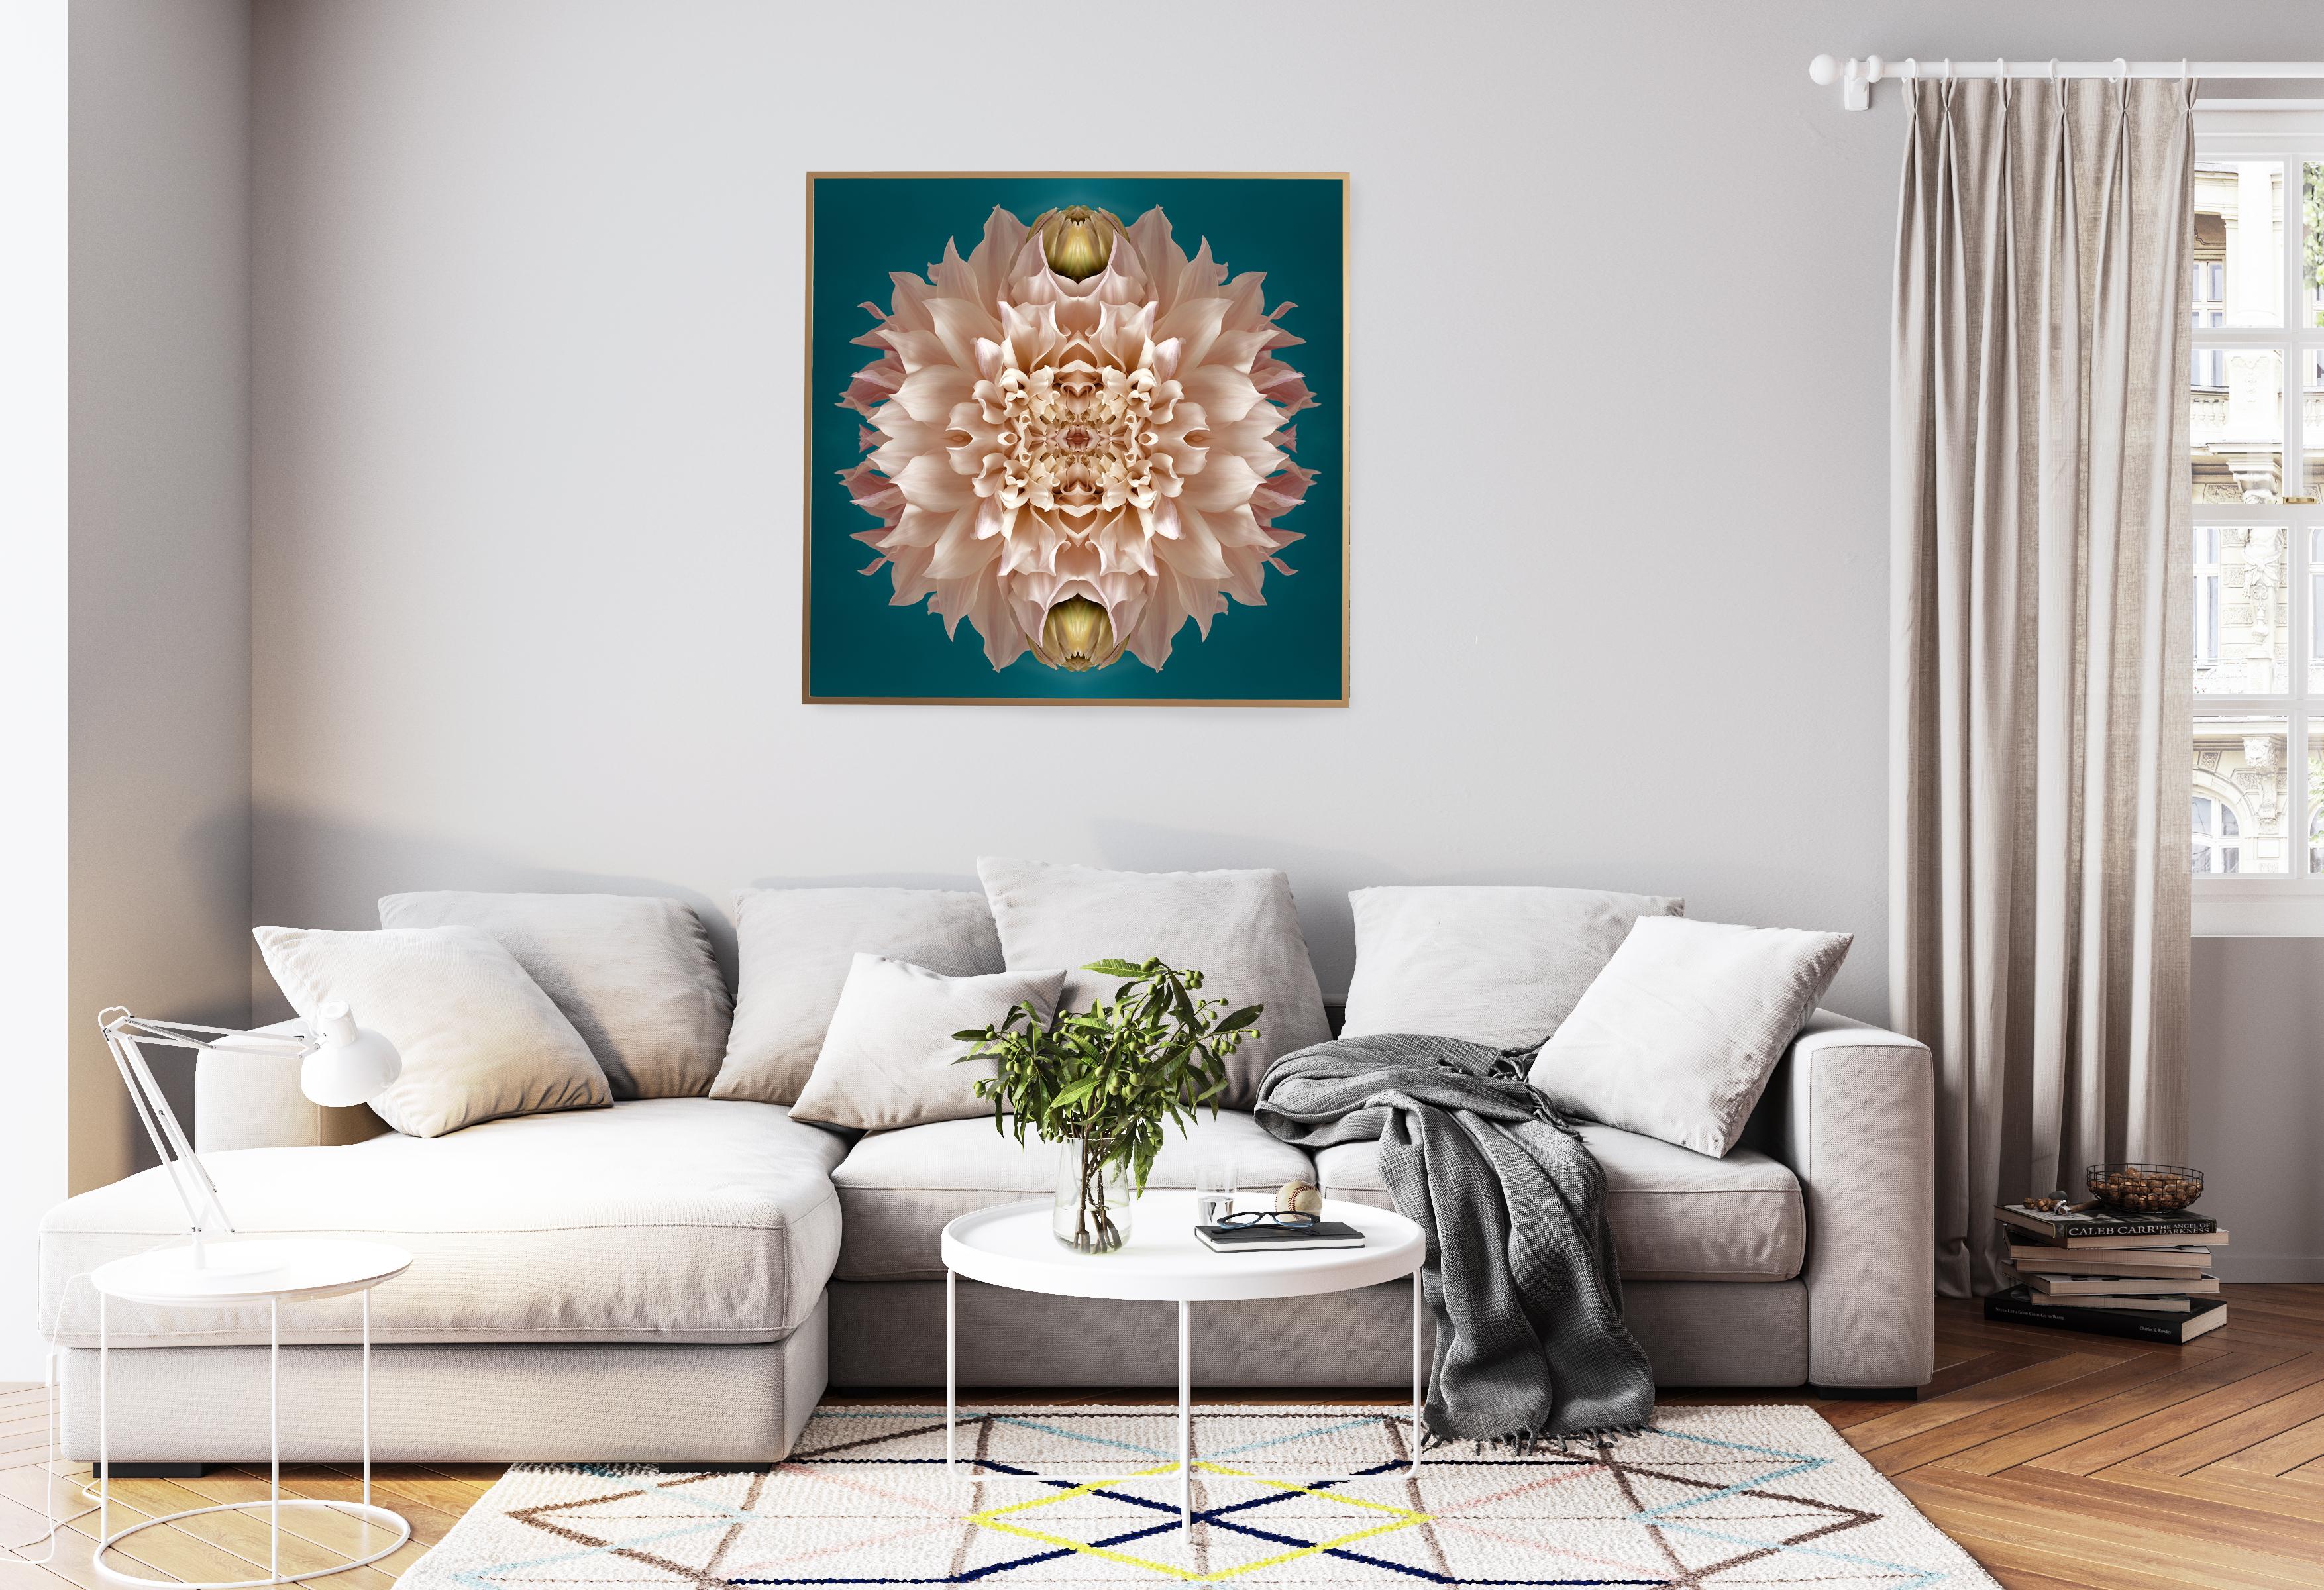 This print features the playful relationship between natural forms and botanicals. In this image Erin uses the natural composition of the pink dahlia, and her own collage work, to create a hypnotic mandala with the floral. Some describe it as a